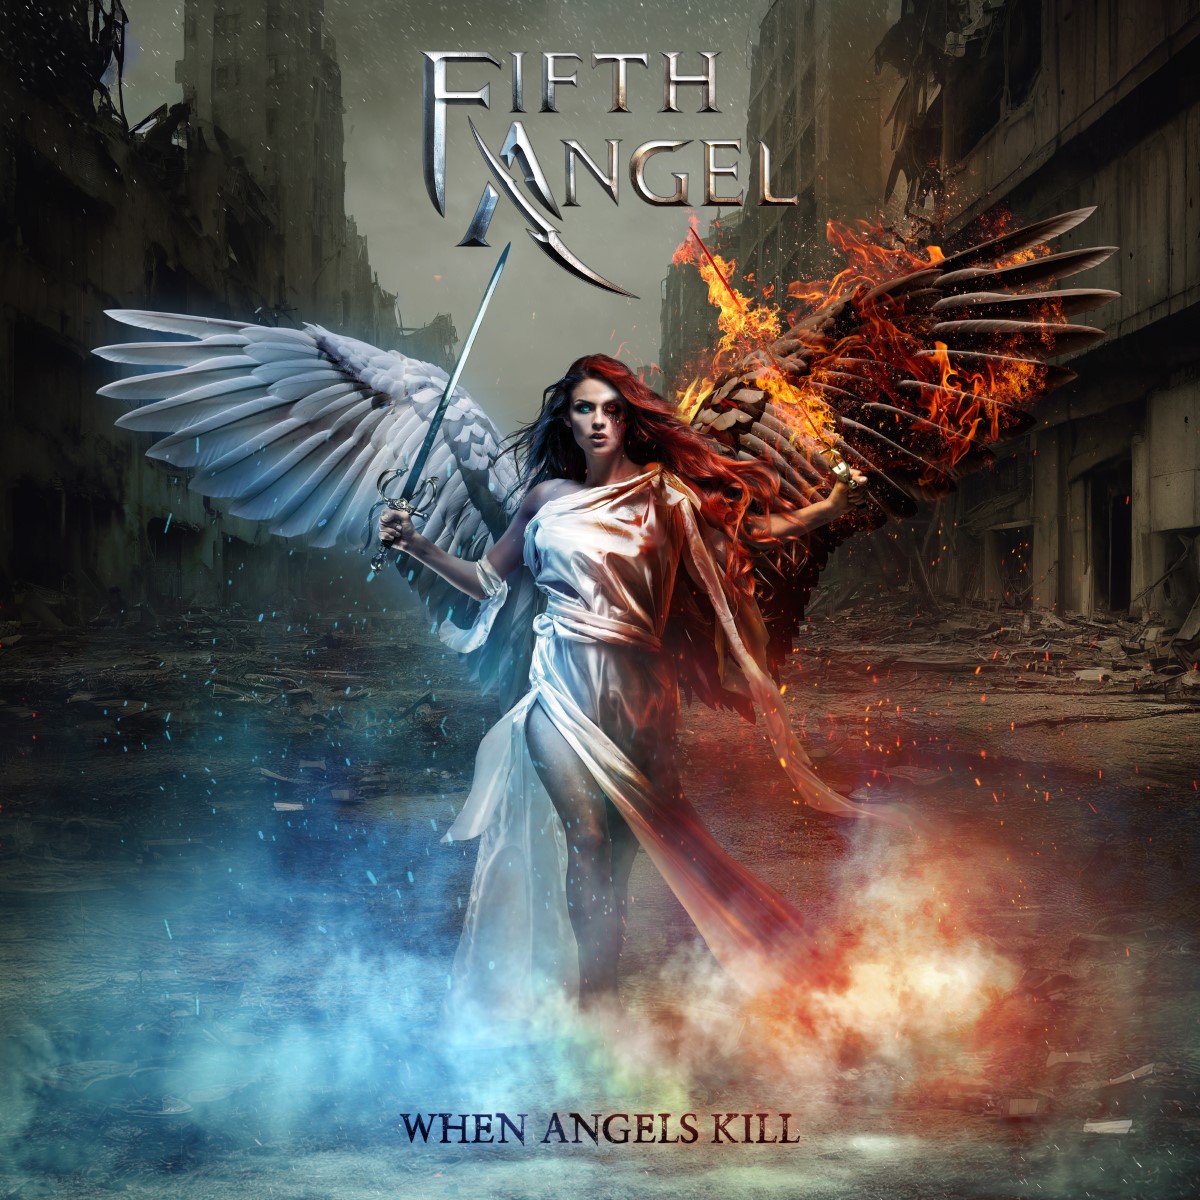 The mighty FIFTH ANGEL is proud to announce their epic fourth album, When Angels Kill, which will be released on June 16th, 2023 through Nuclear Blast Records.